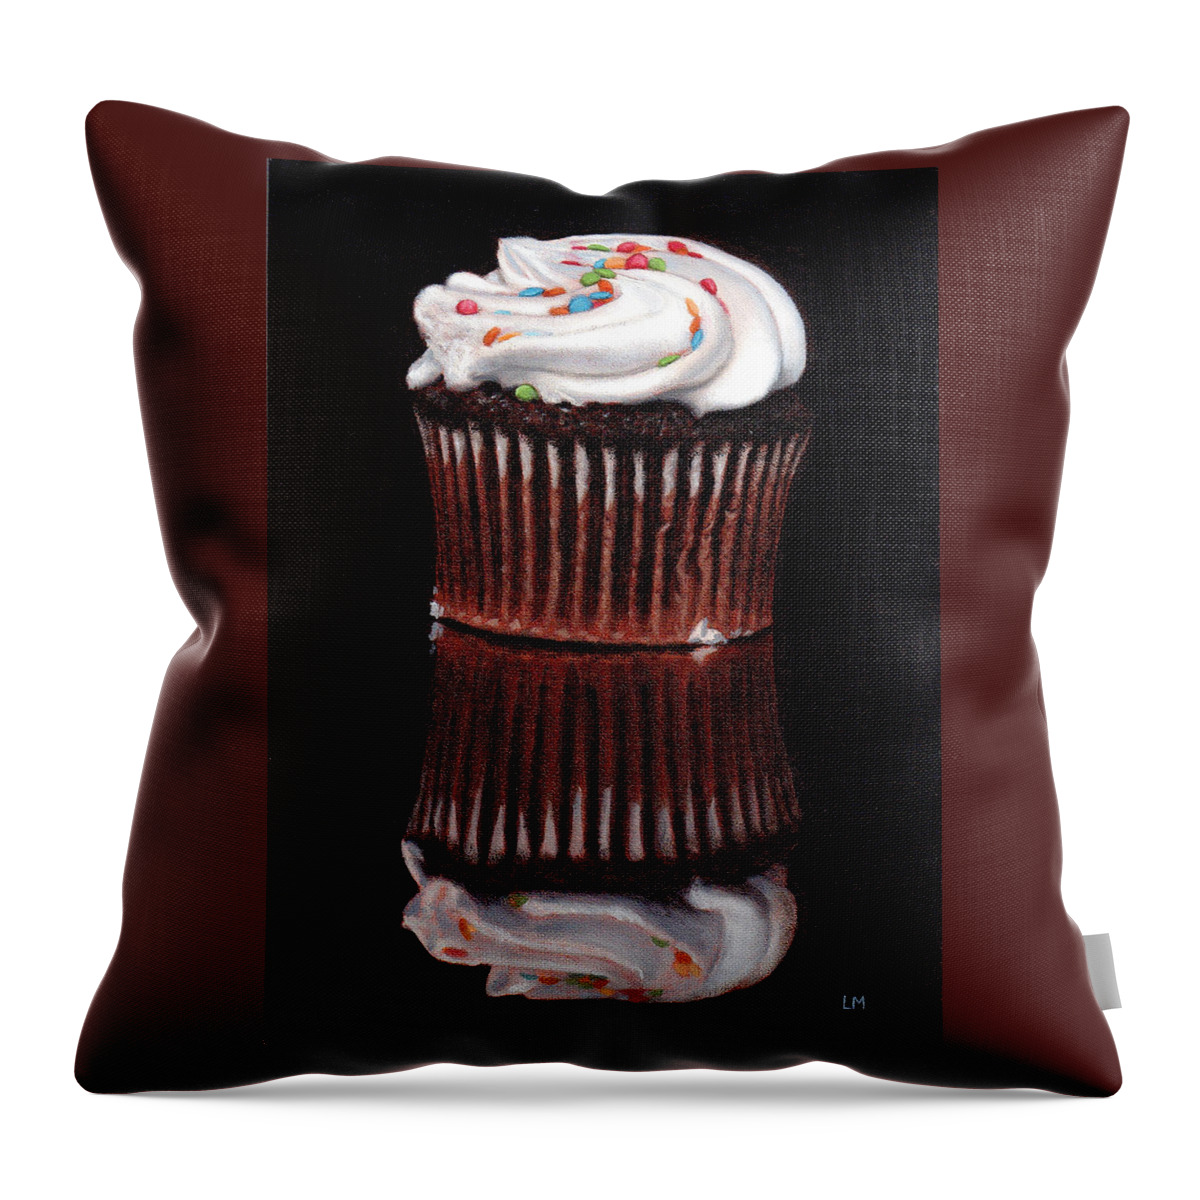 Cupcake Throw Pillow featuring the painting Cupcake Reflections by Linda Merchant